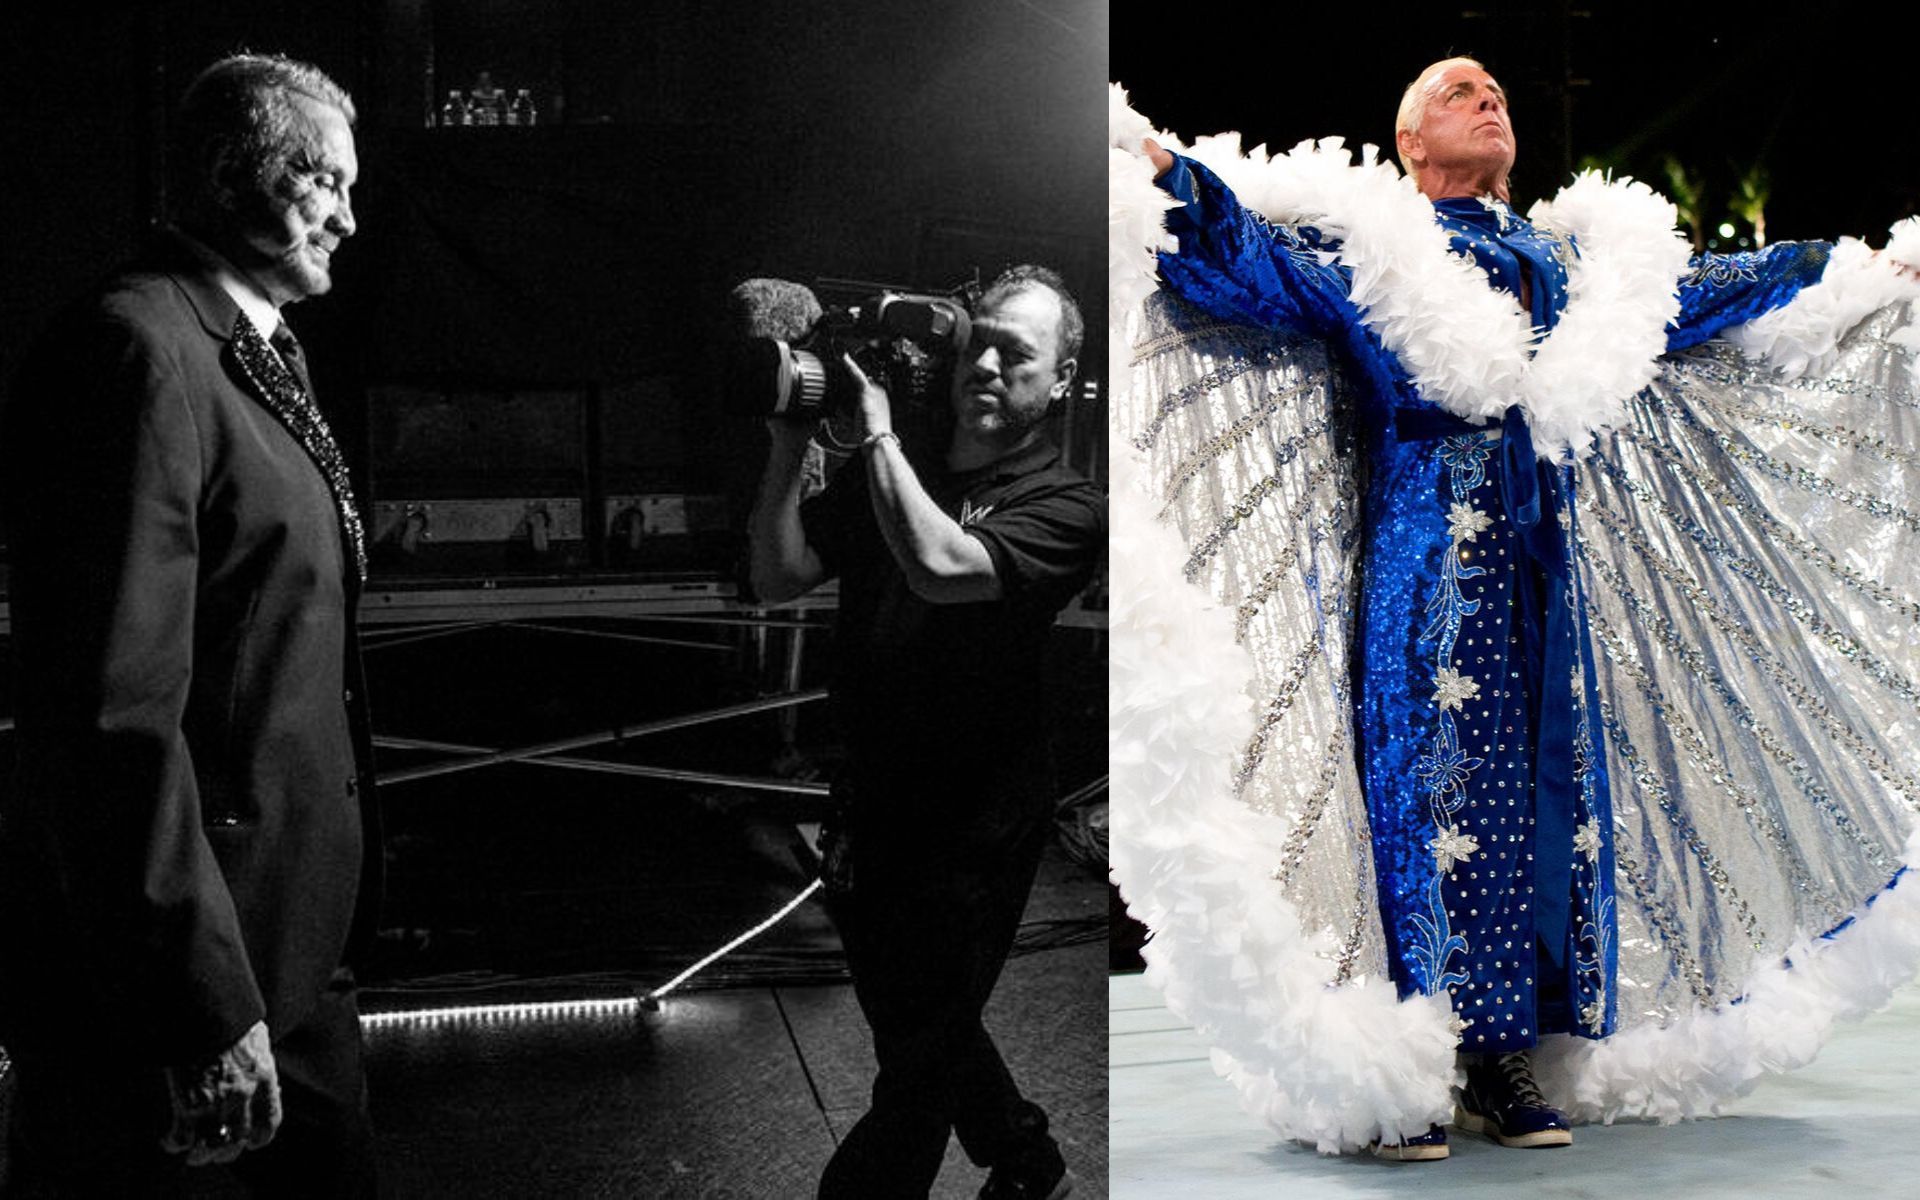 DDP and Ric Flair could support Cody Rhodes during his title reign!